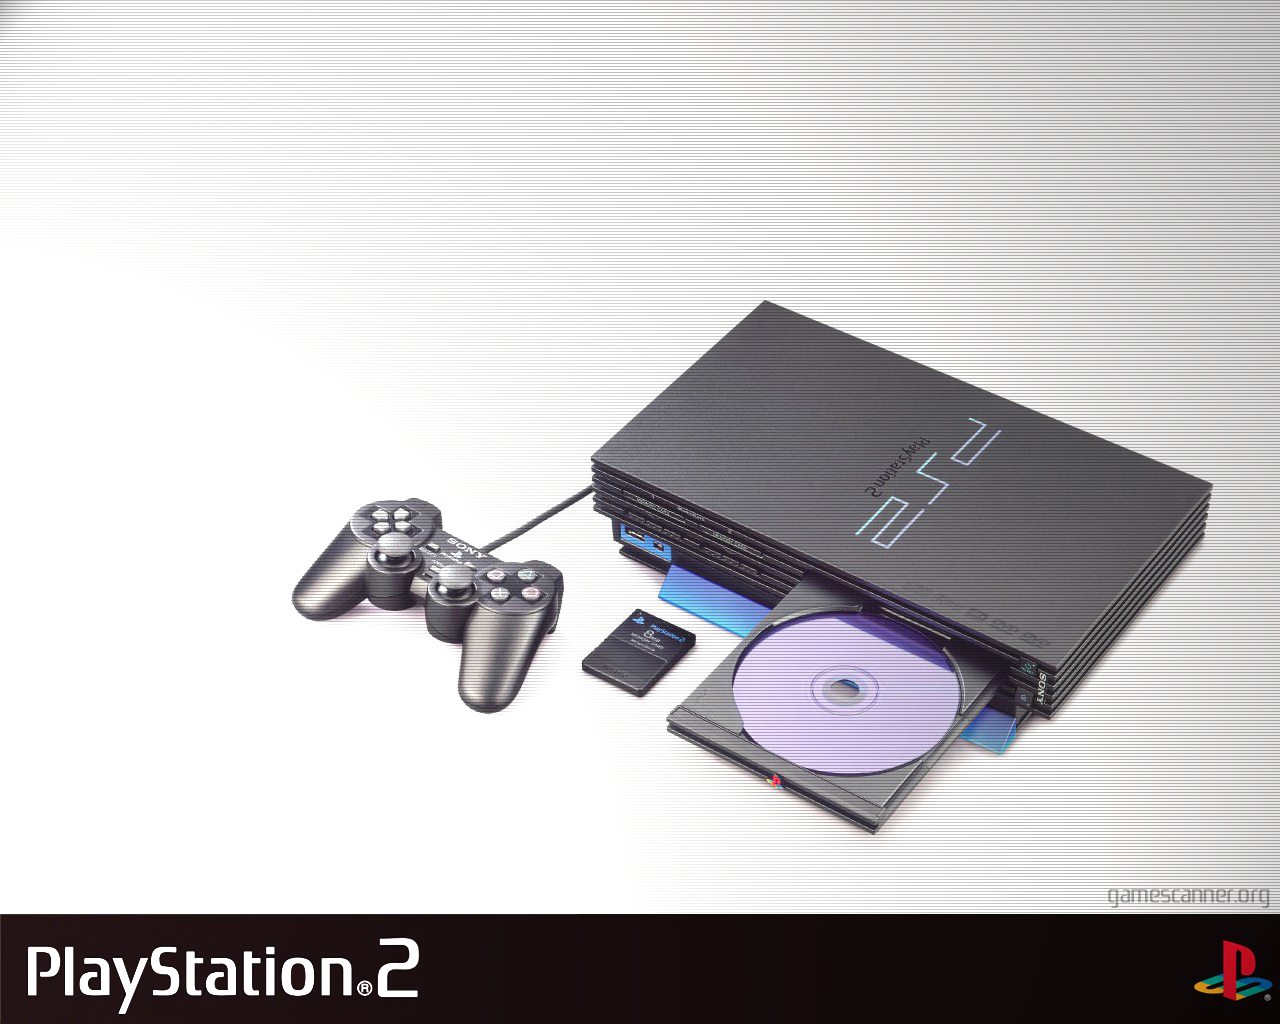 Download full size Playstation 2 wallpaper / Computer / 1280x1024